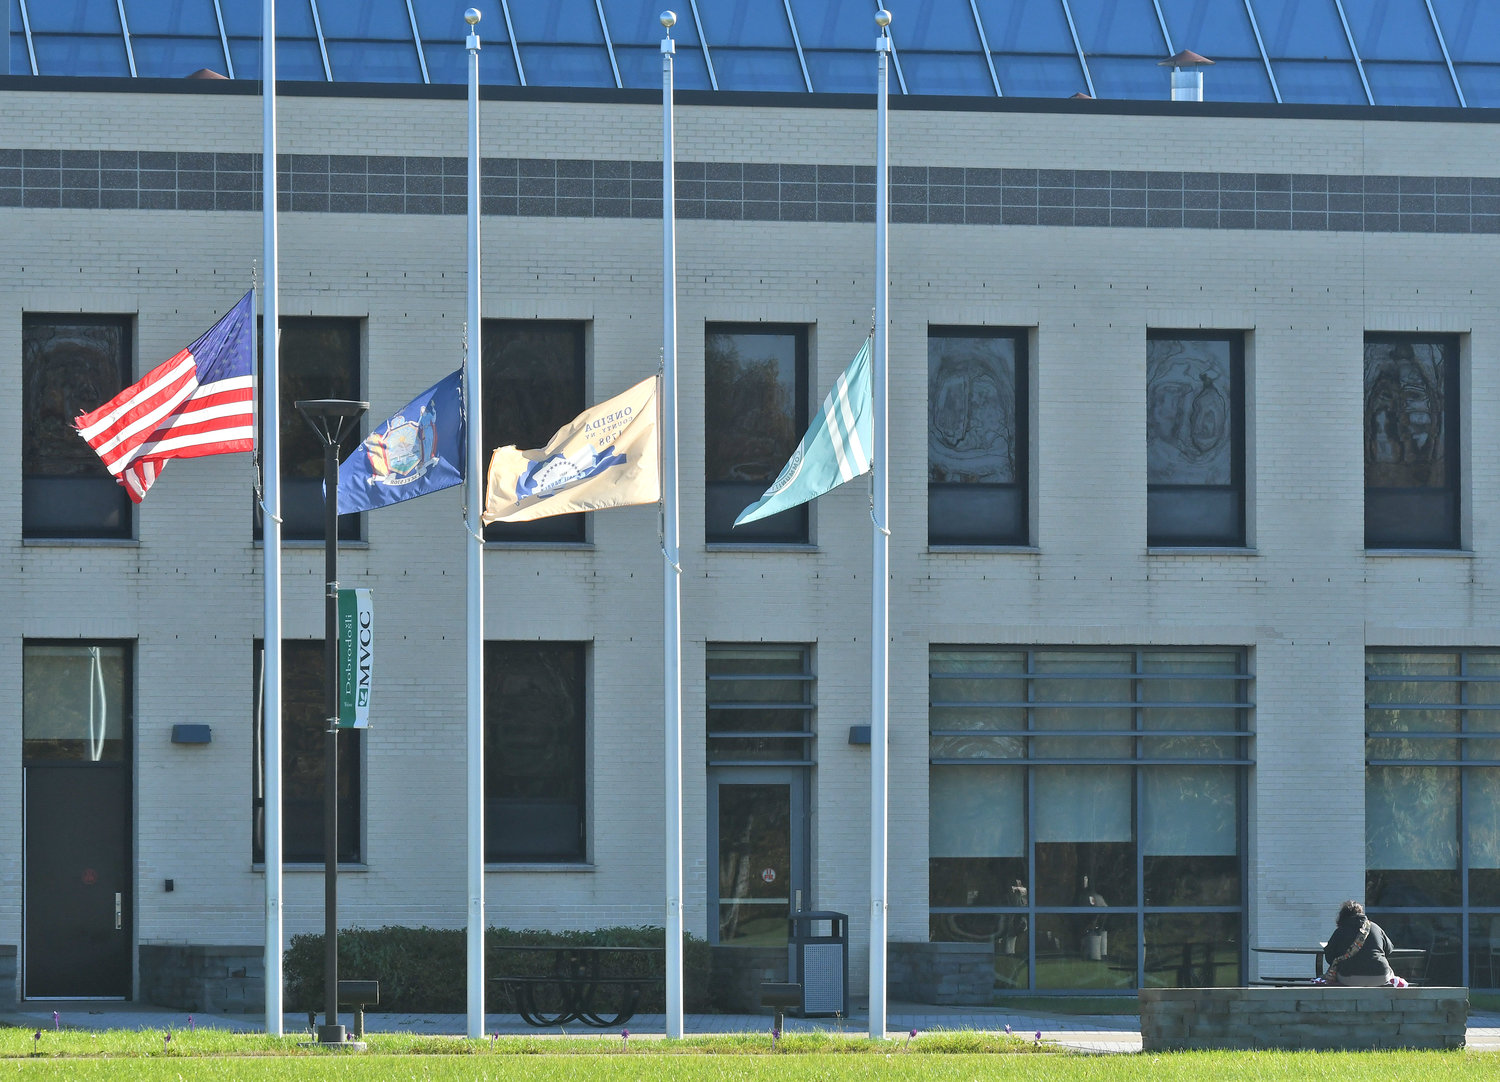 Flags at MVCC campus with a student sitting at a nearby table.